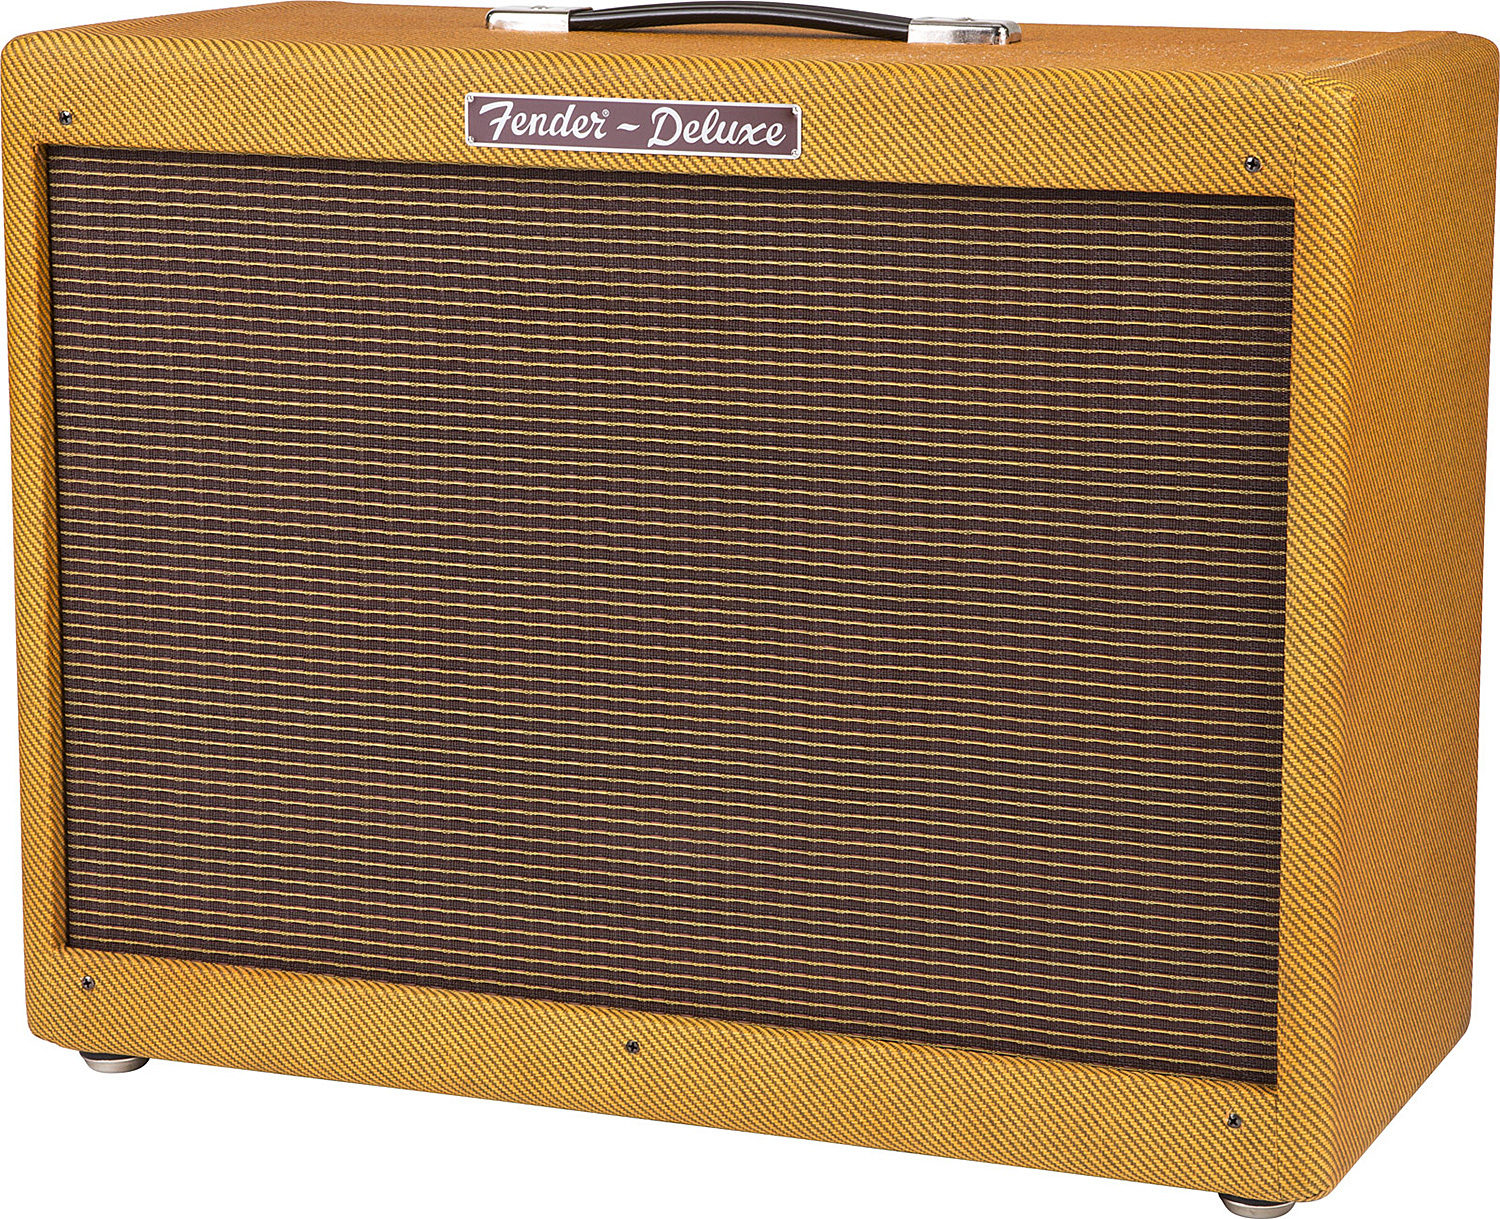 Fender Hot Rod Deluxe 112 80w 1x12 Lacquered Tweed - Electric guitar amp cabinet - Main picture